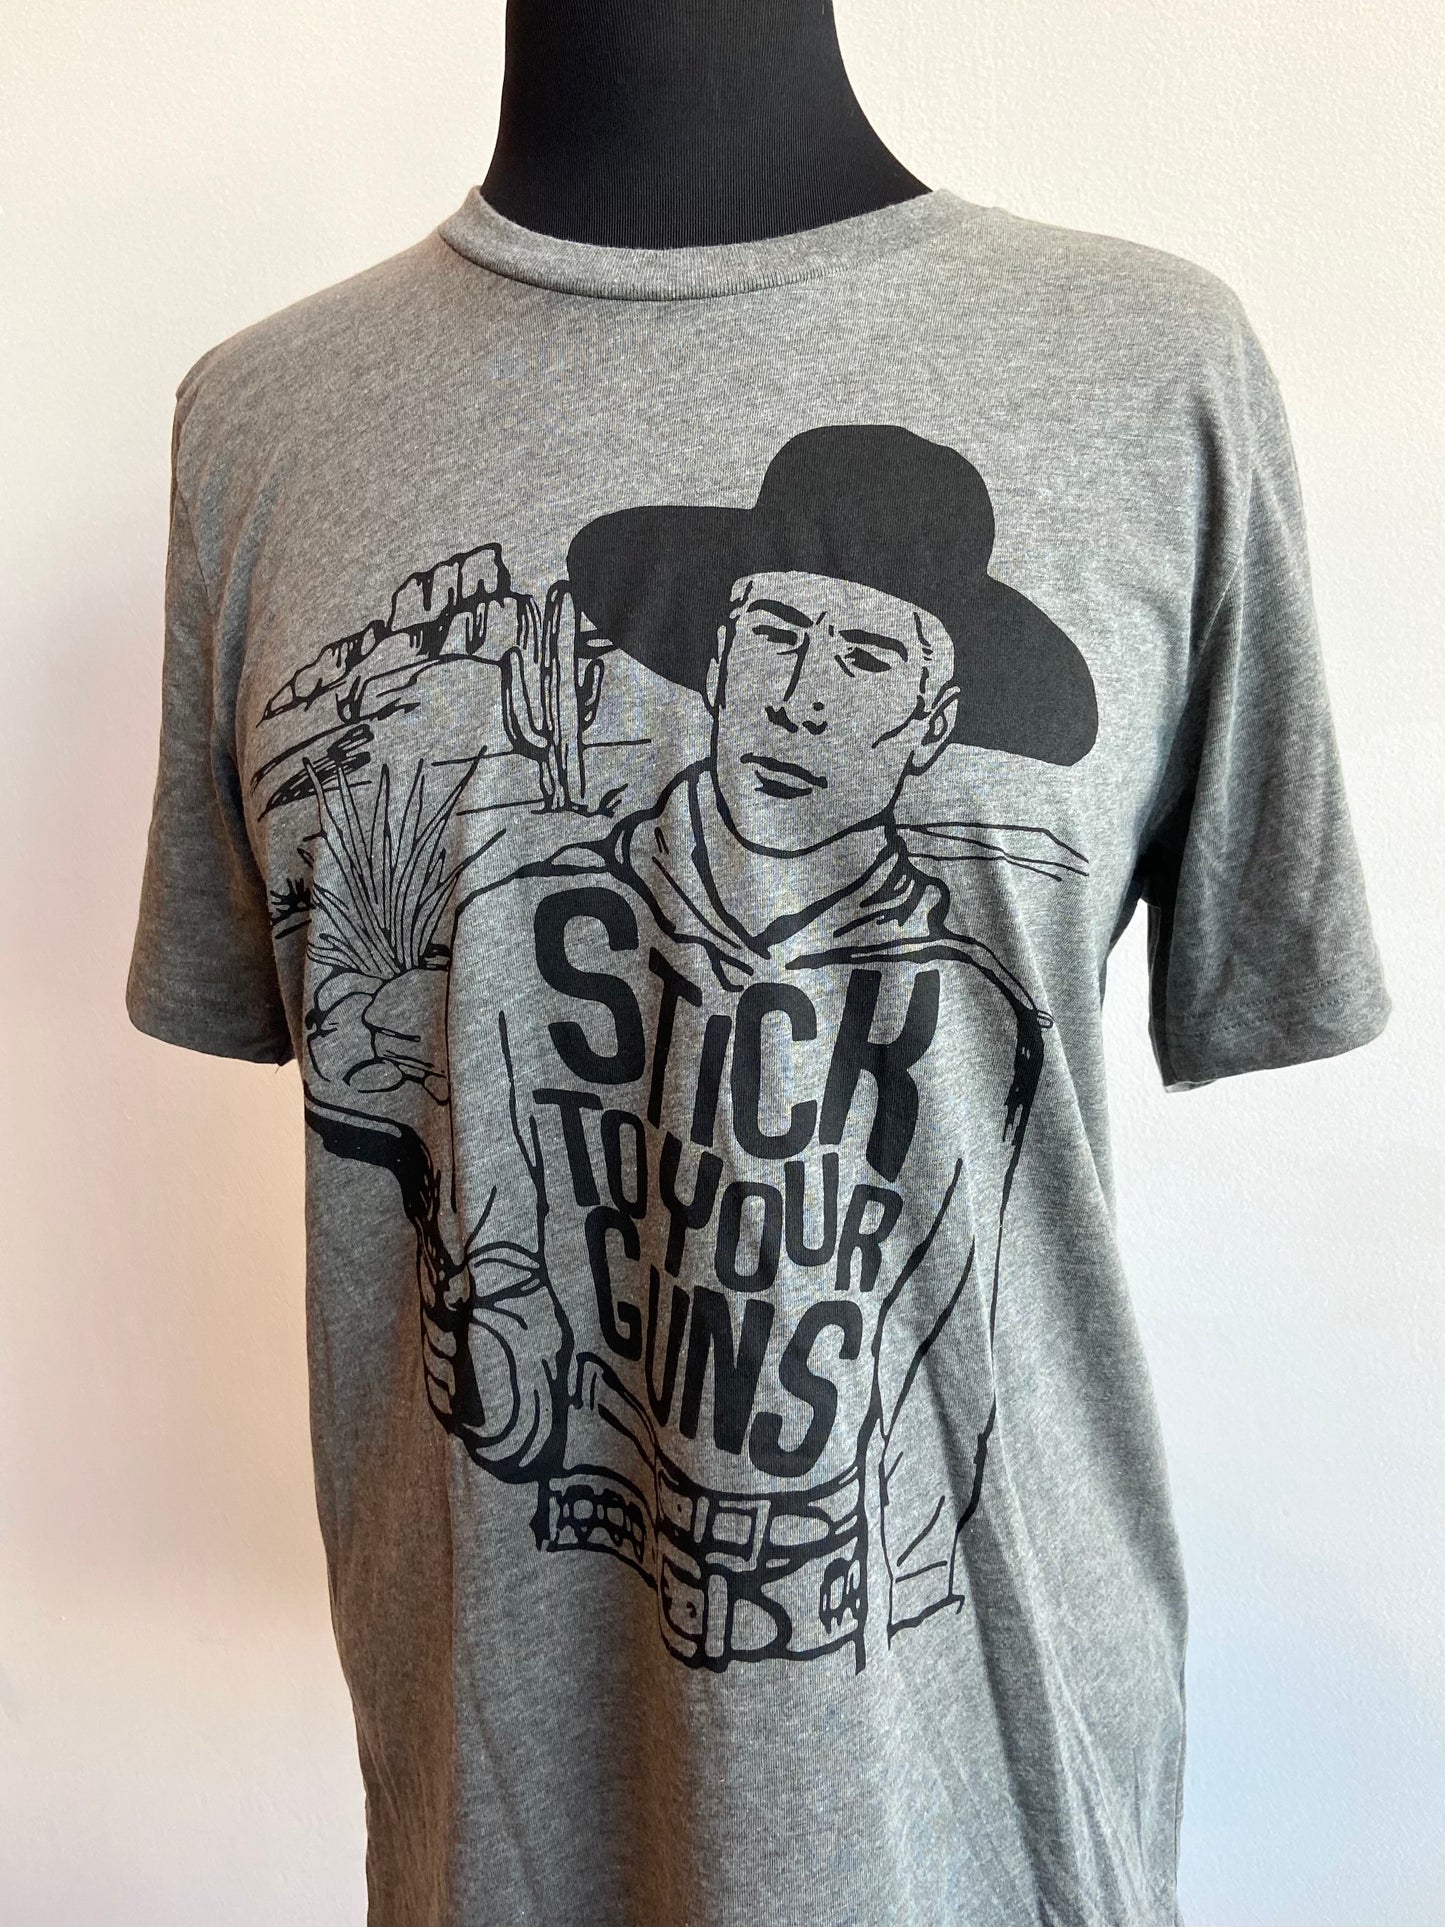 Grey graphic tshirt with black letters and cowboy saying stick to your guns short sleeve at 6Whiskey six whisky mens or womens bella canvas soft tee